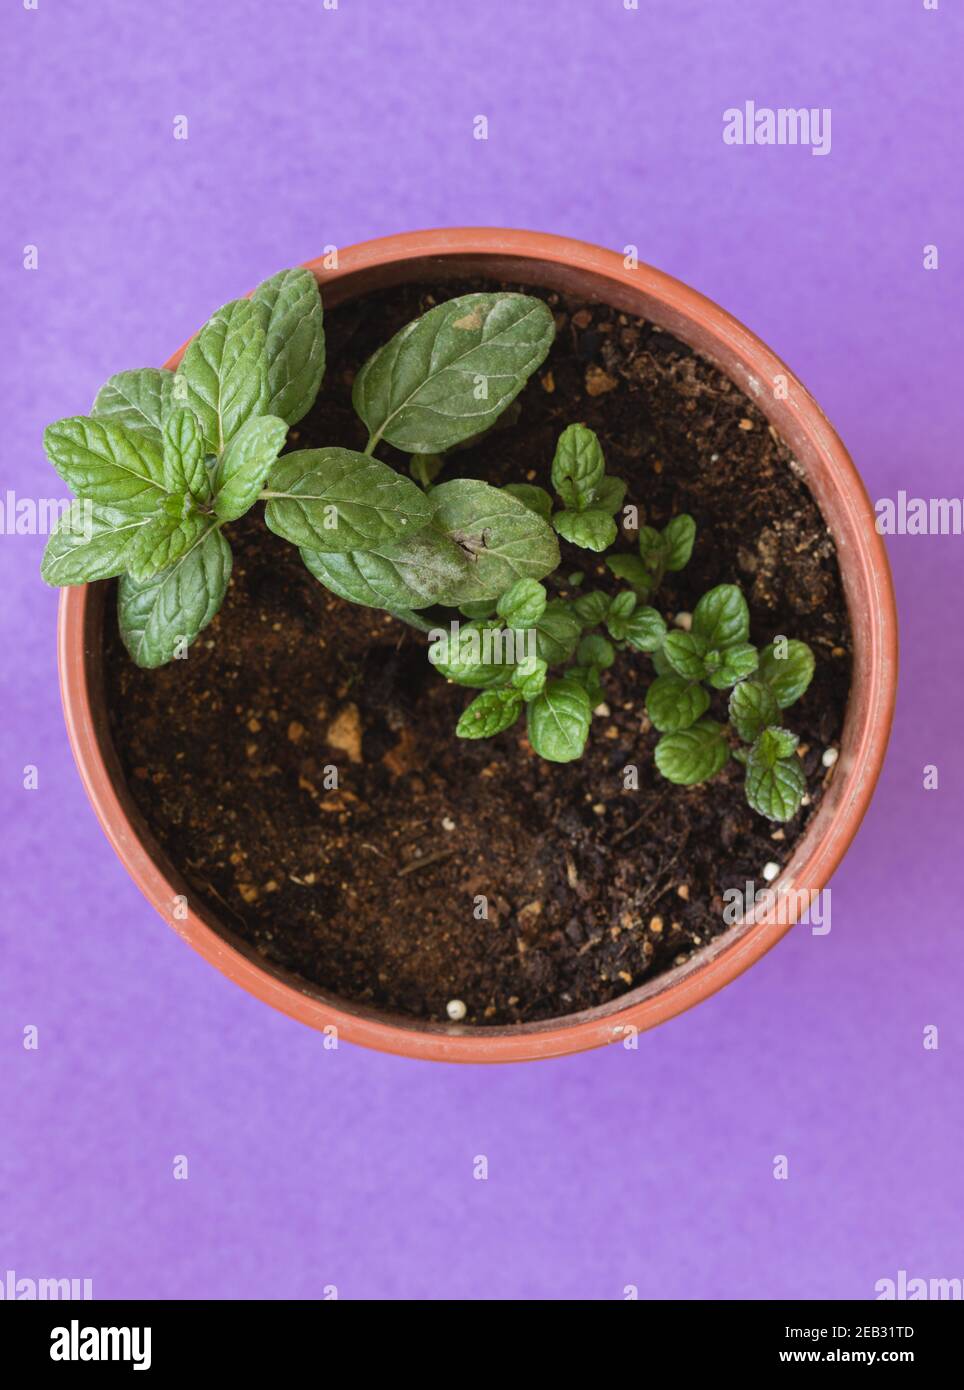 A red-brown flowerpot with a mint seedling inside, on a purple background Stock Photo